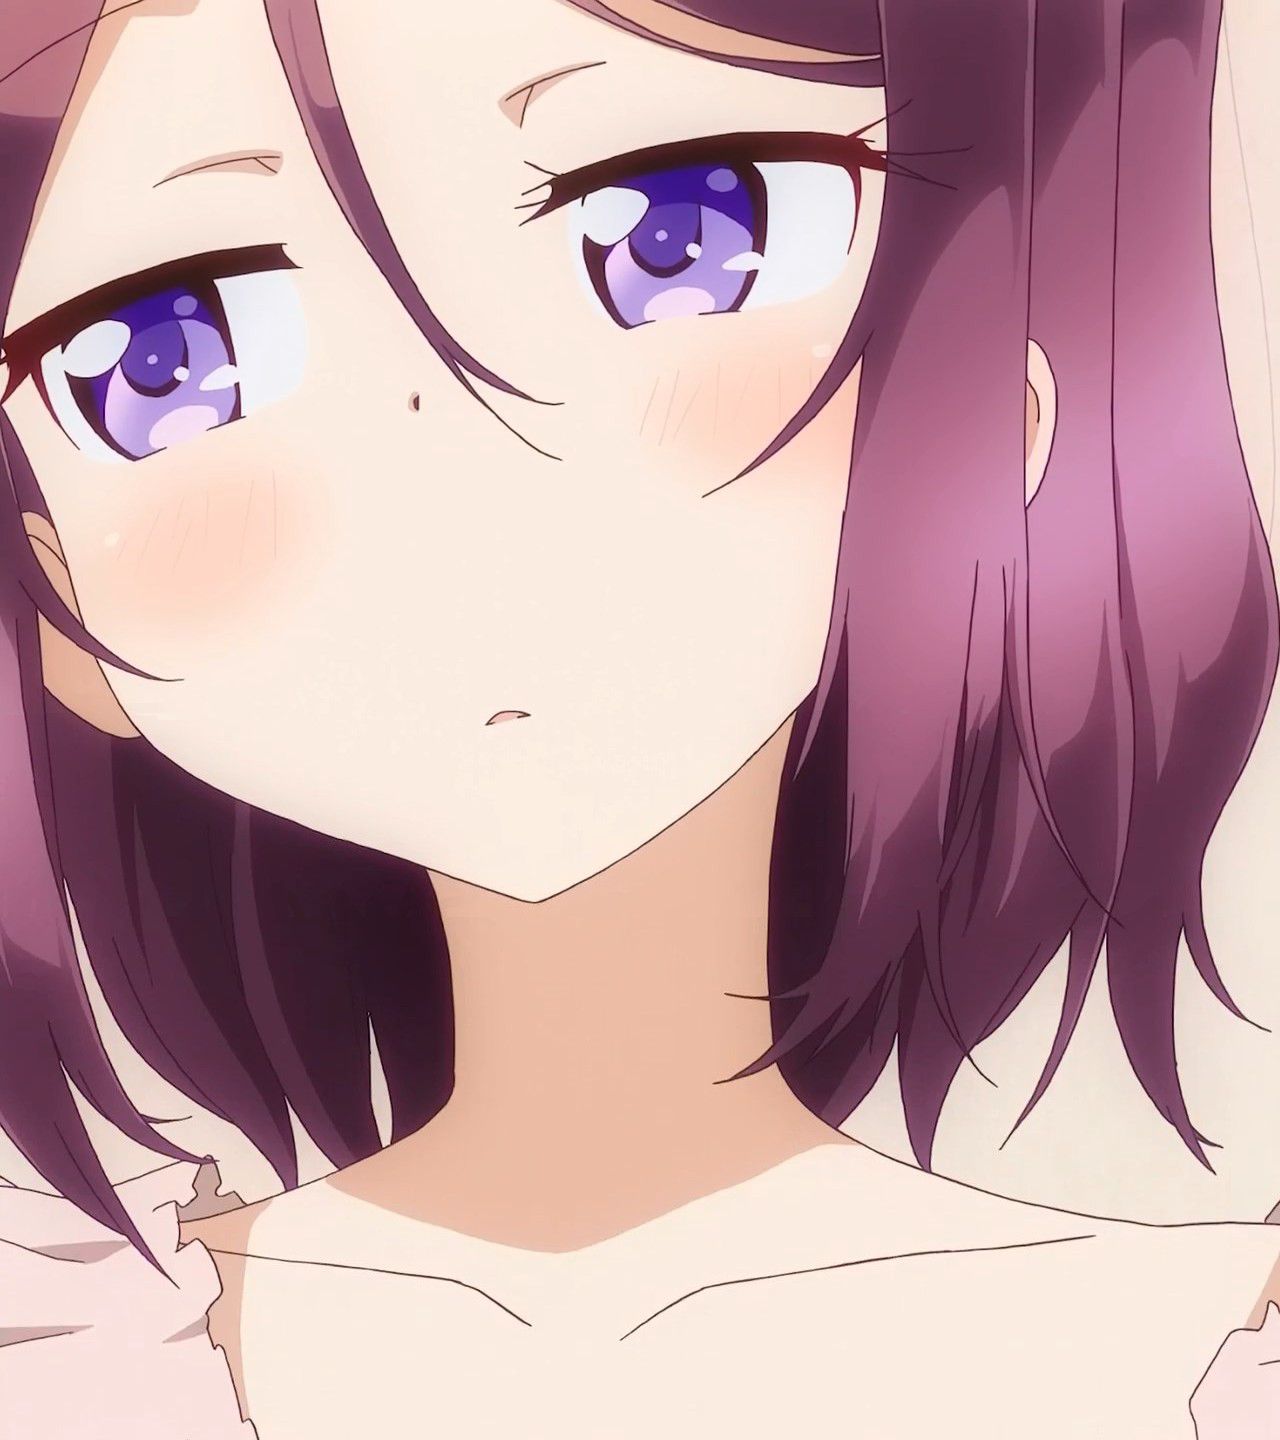 [Artificial mouth times] "NEW GAME! "Of all nine episodes, Yuri hifumi nude too たまらな of wwwwwwwww 22